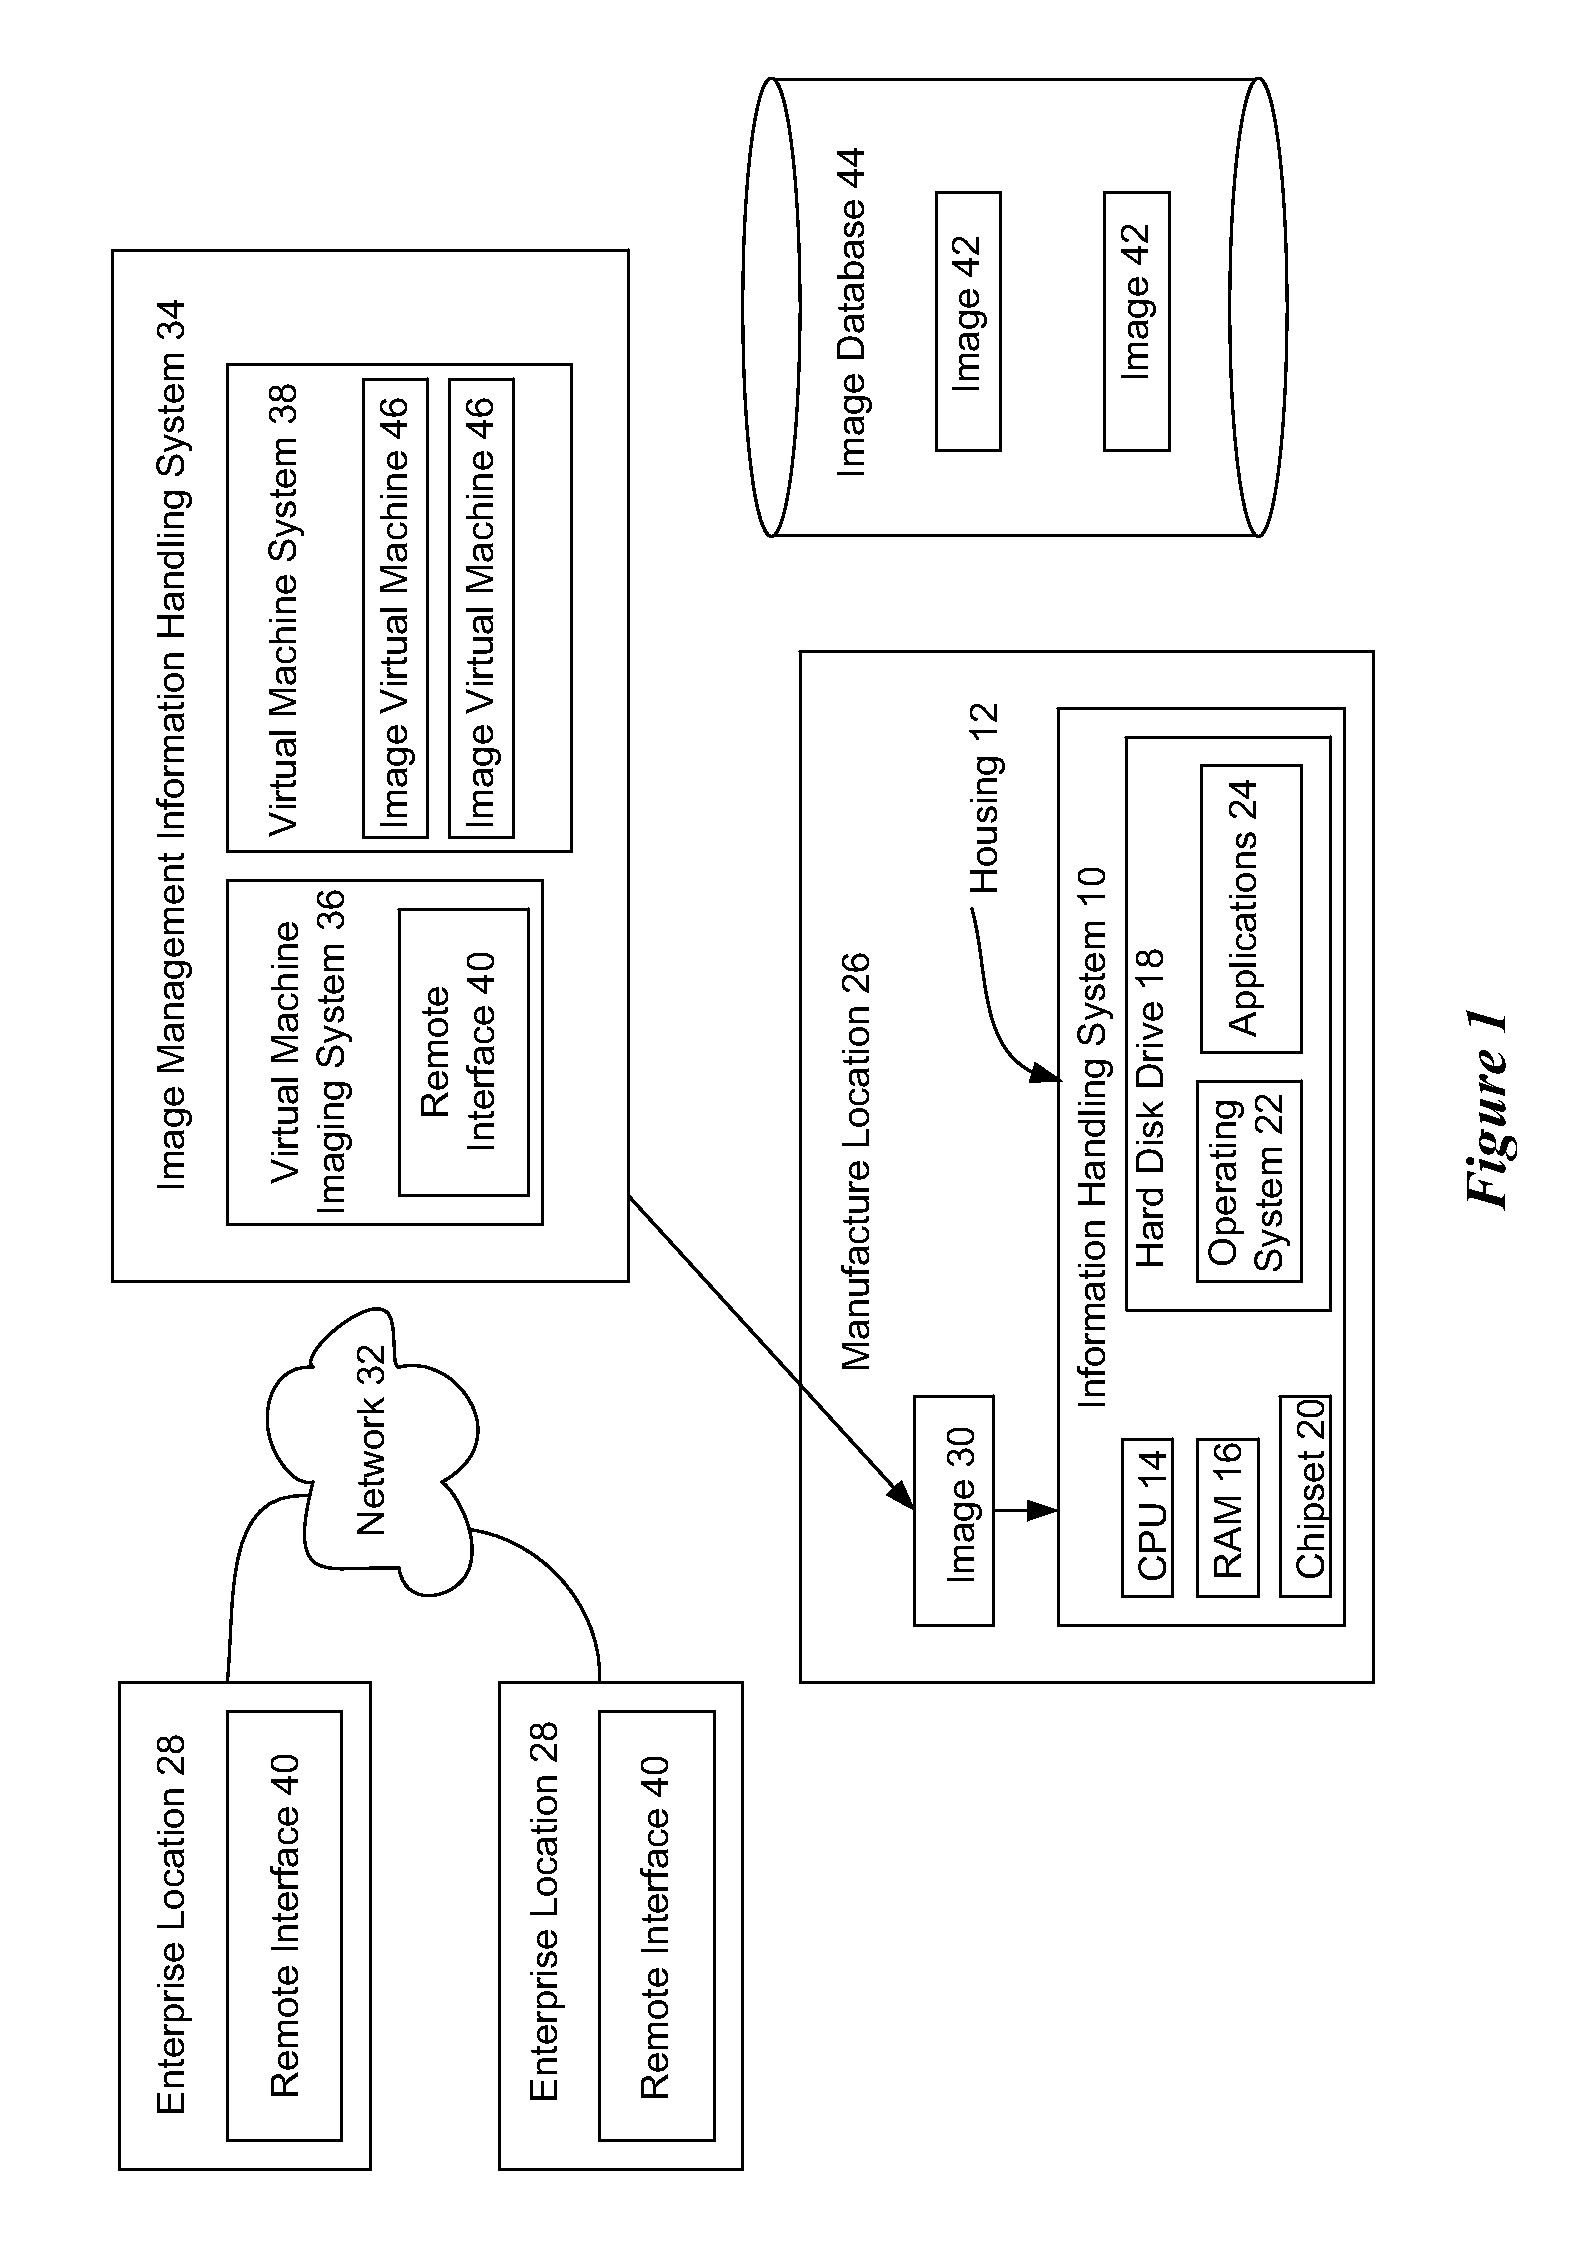 Information handling system image management deployment of virtual machine images to physical information handling systems